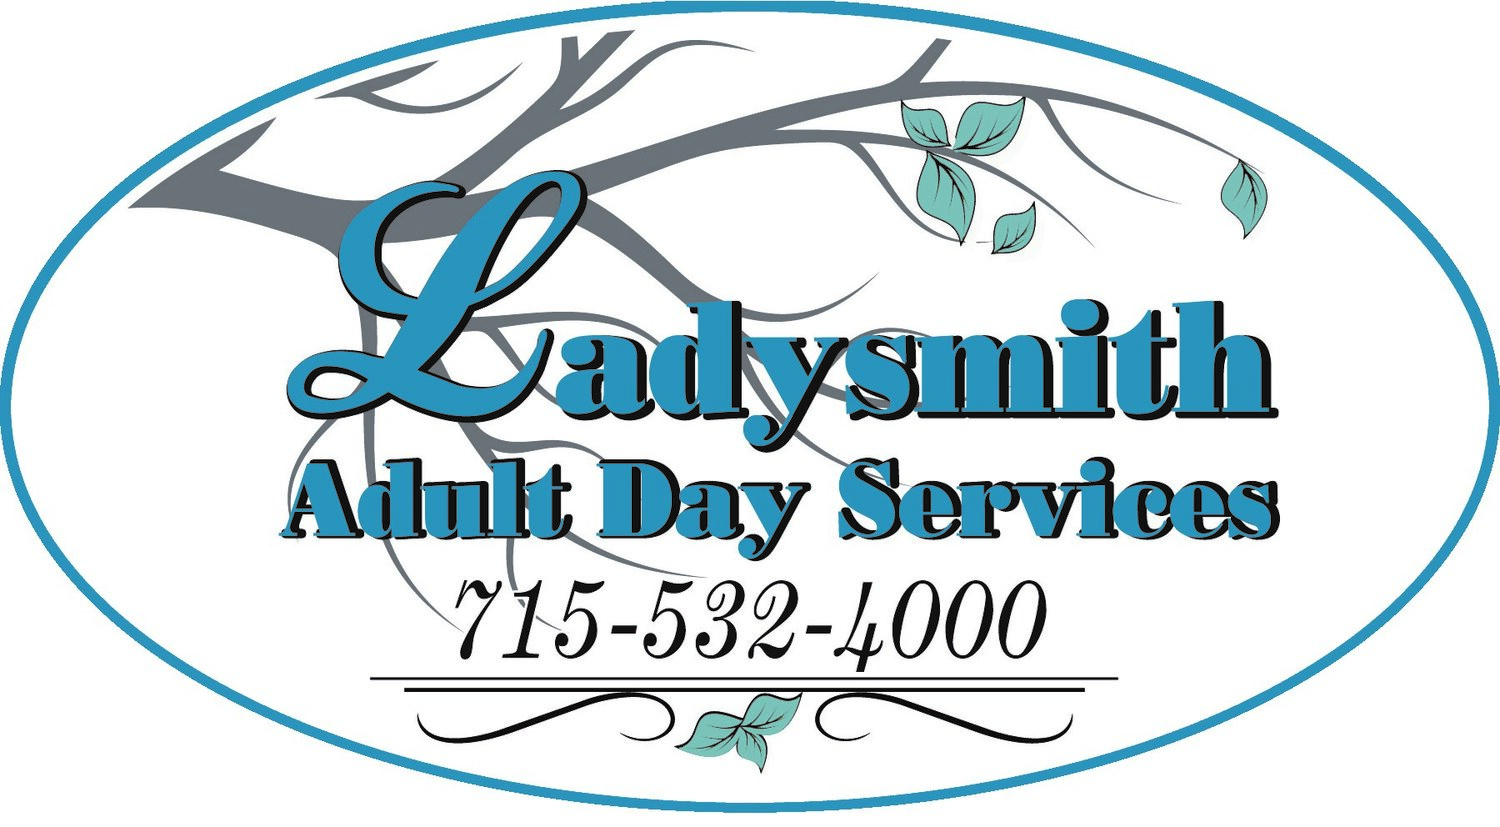 Ladysmith Adult Day Services